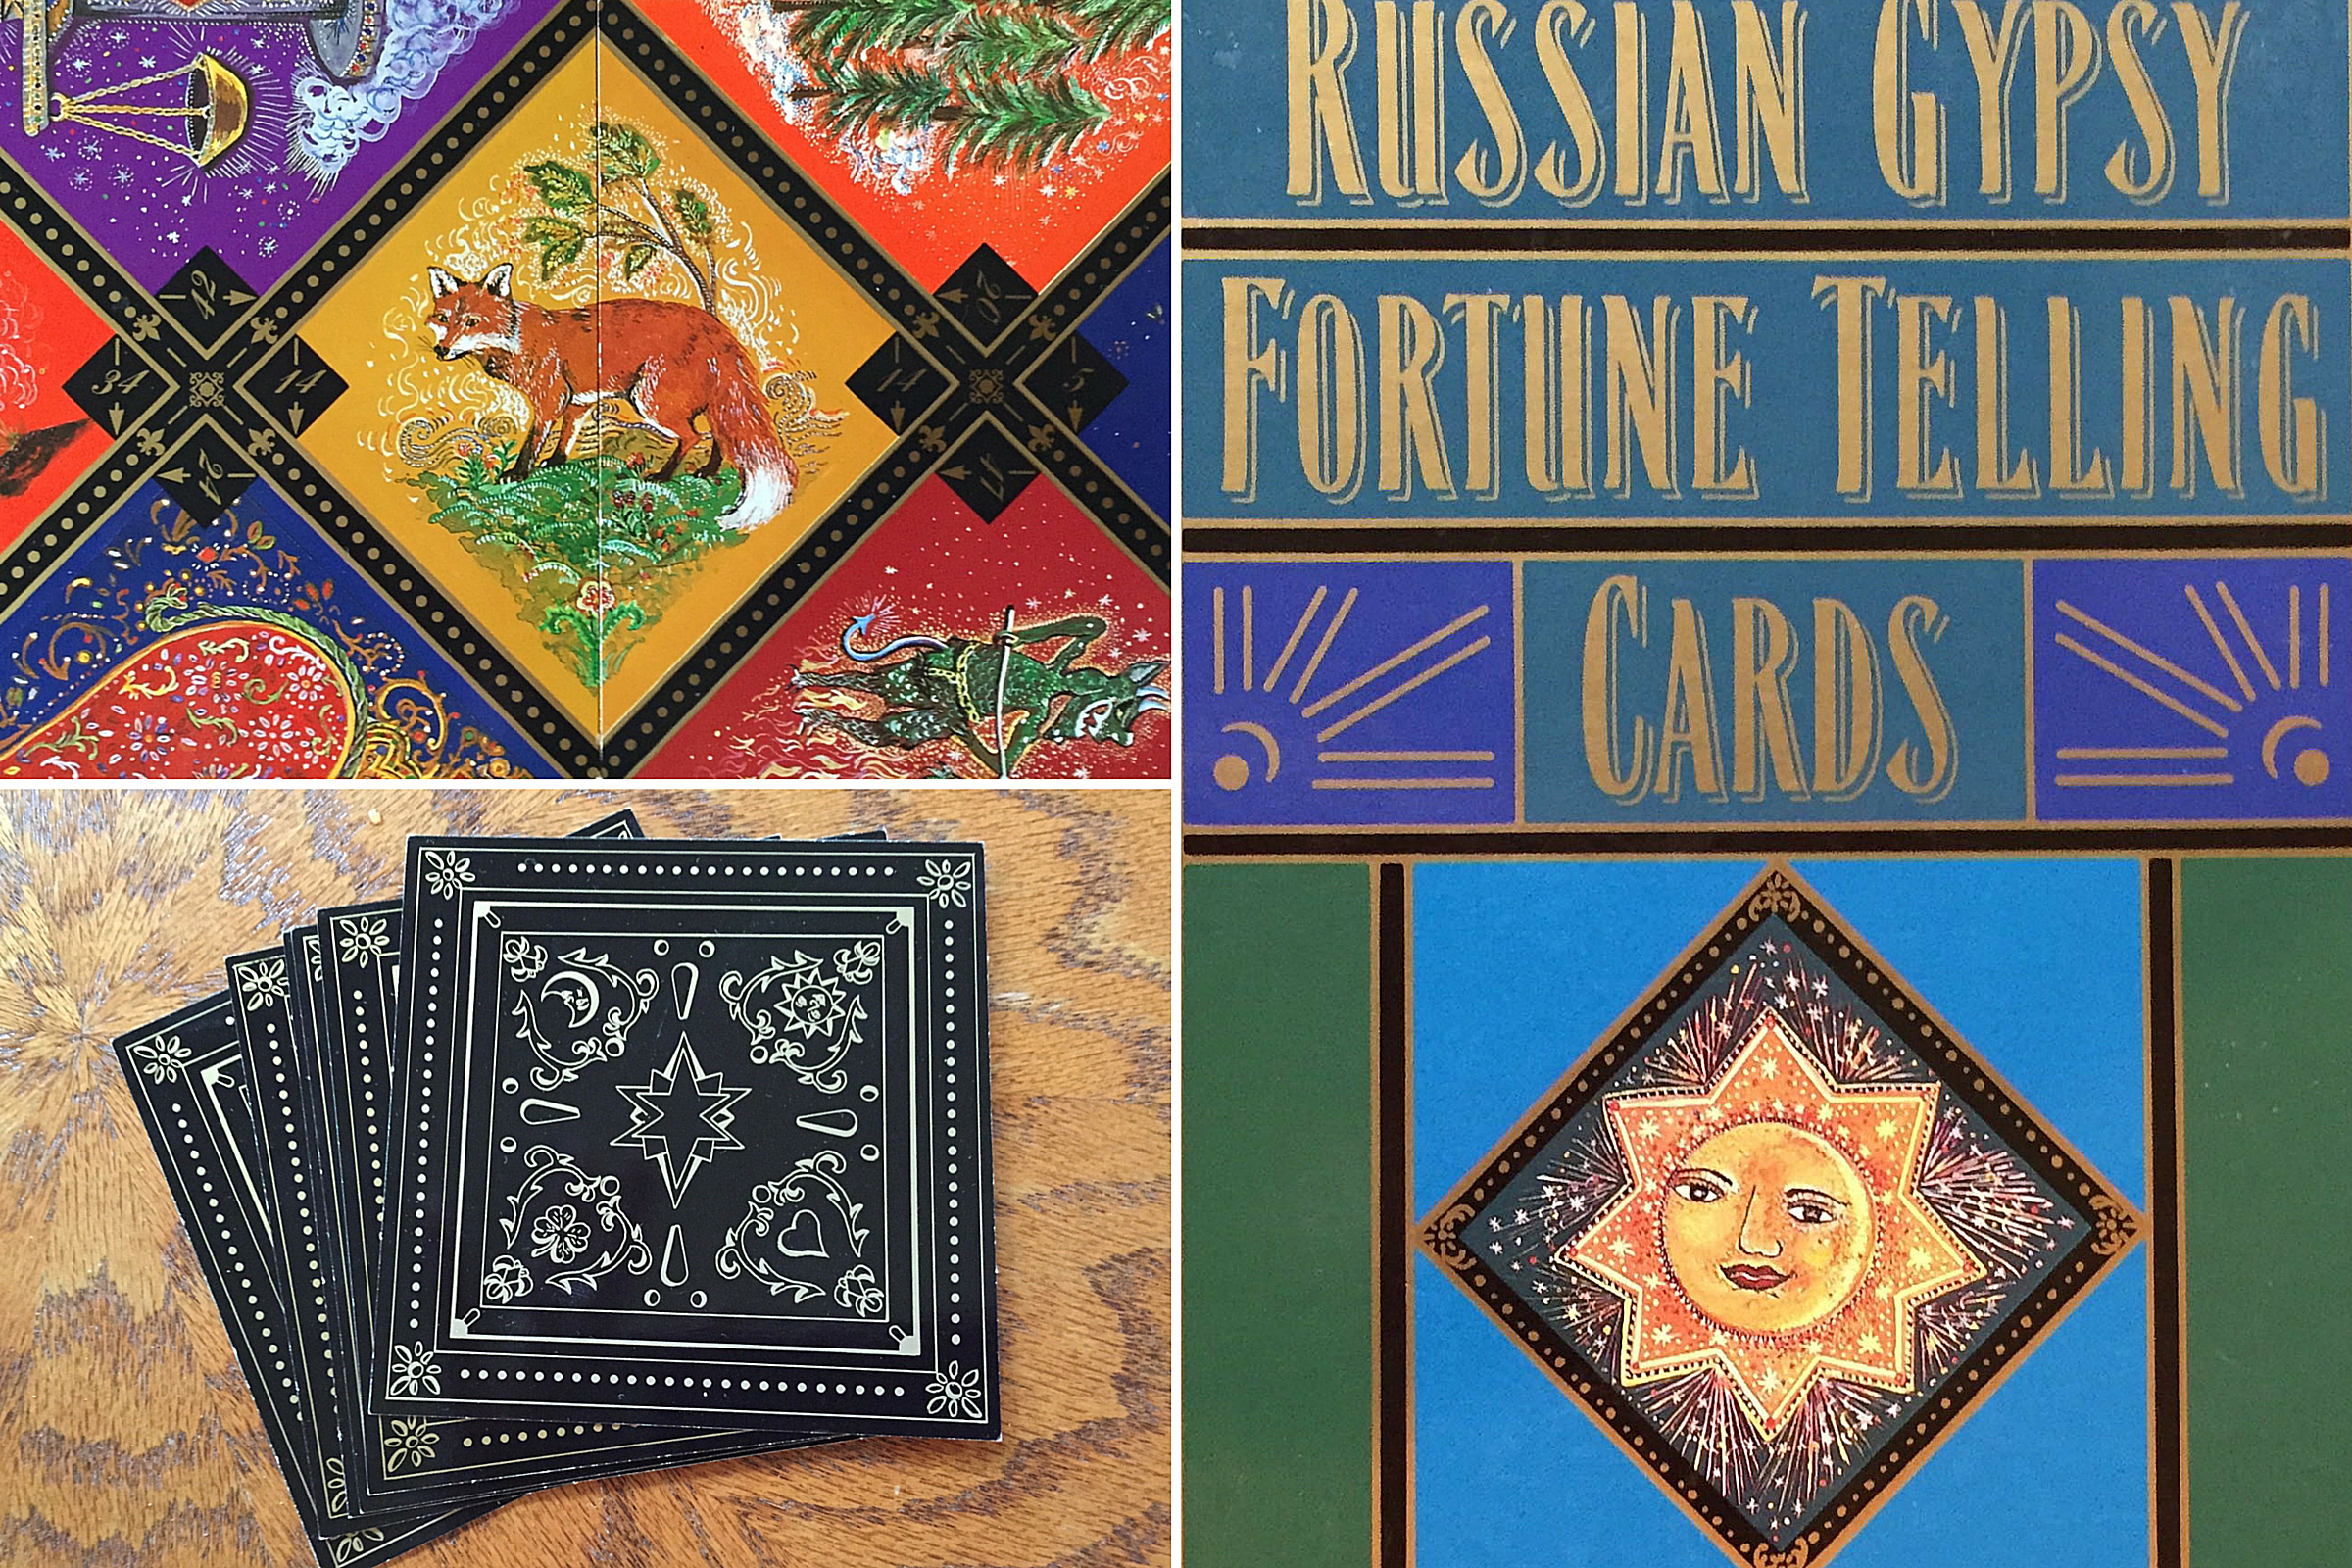 Russian Gypsy Fortune Telling Cards Layout and Reading